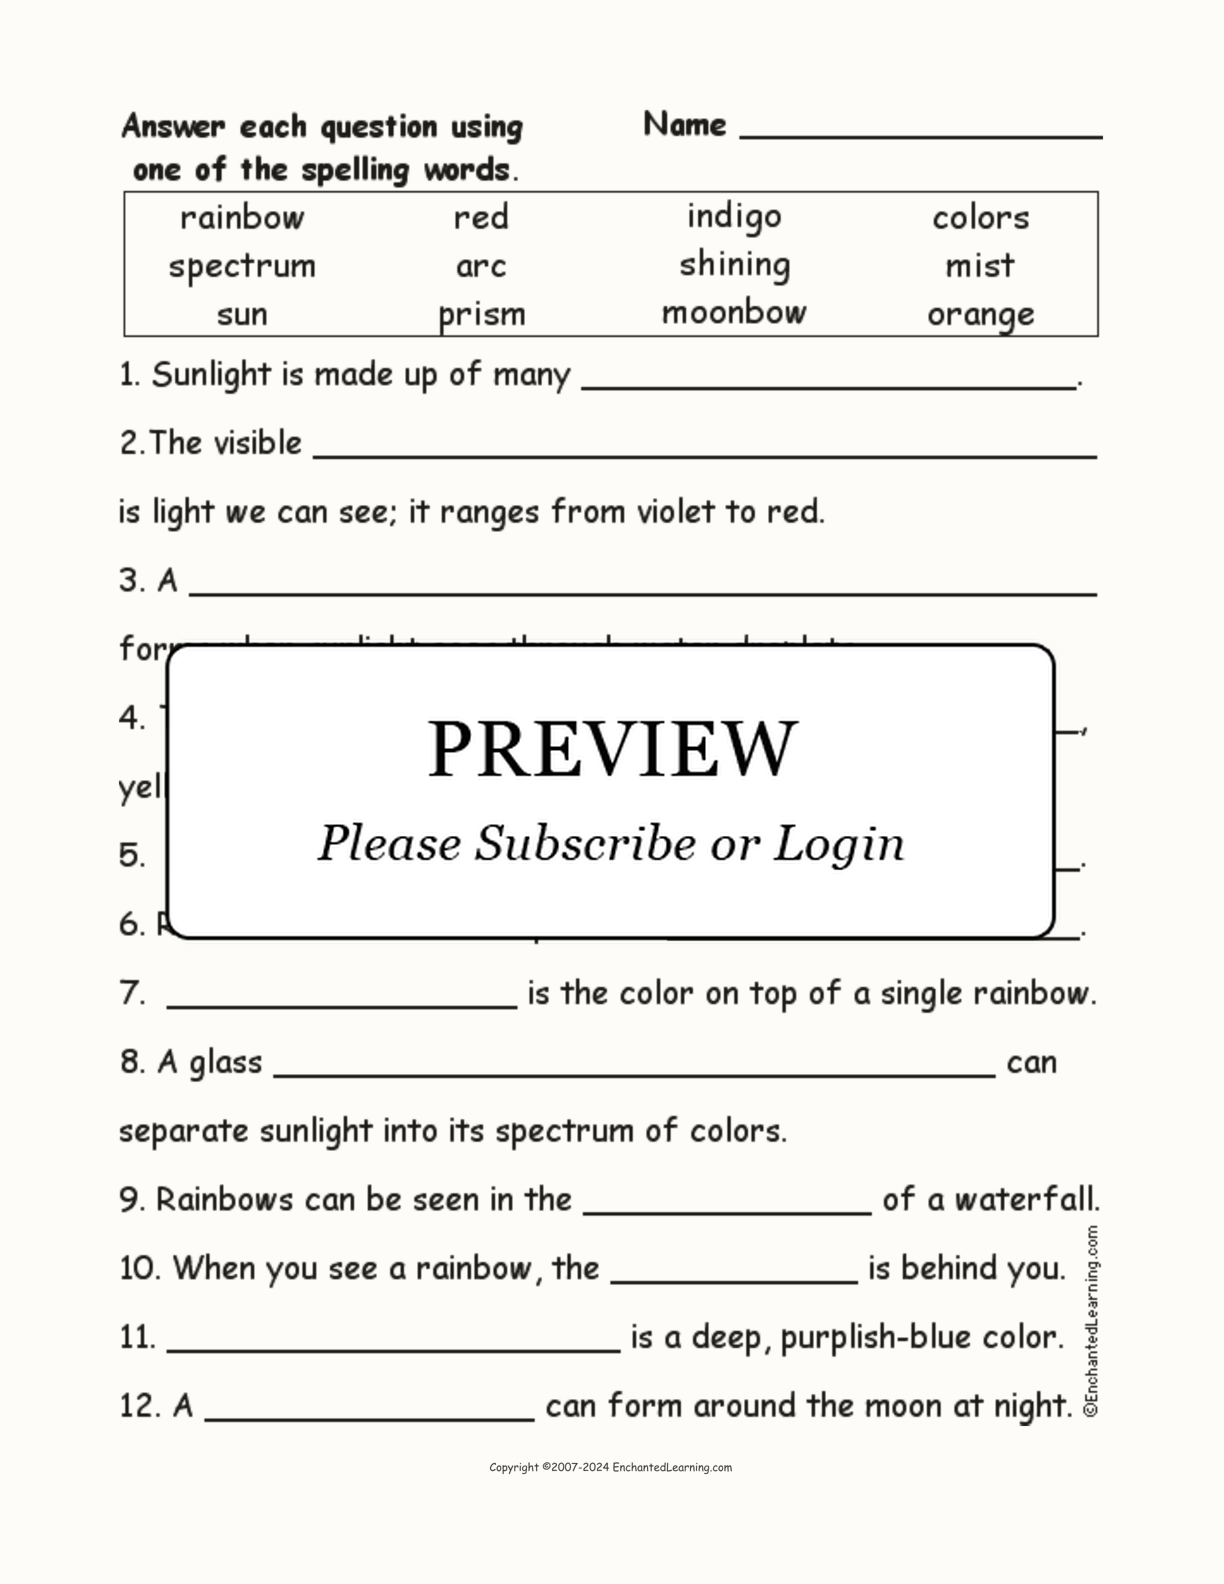 Rainbow Spelling Word Questions interactive worksheet page 1